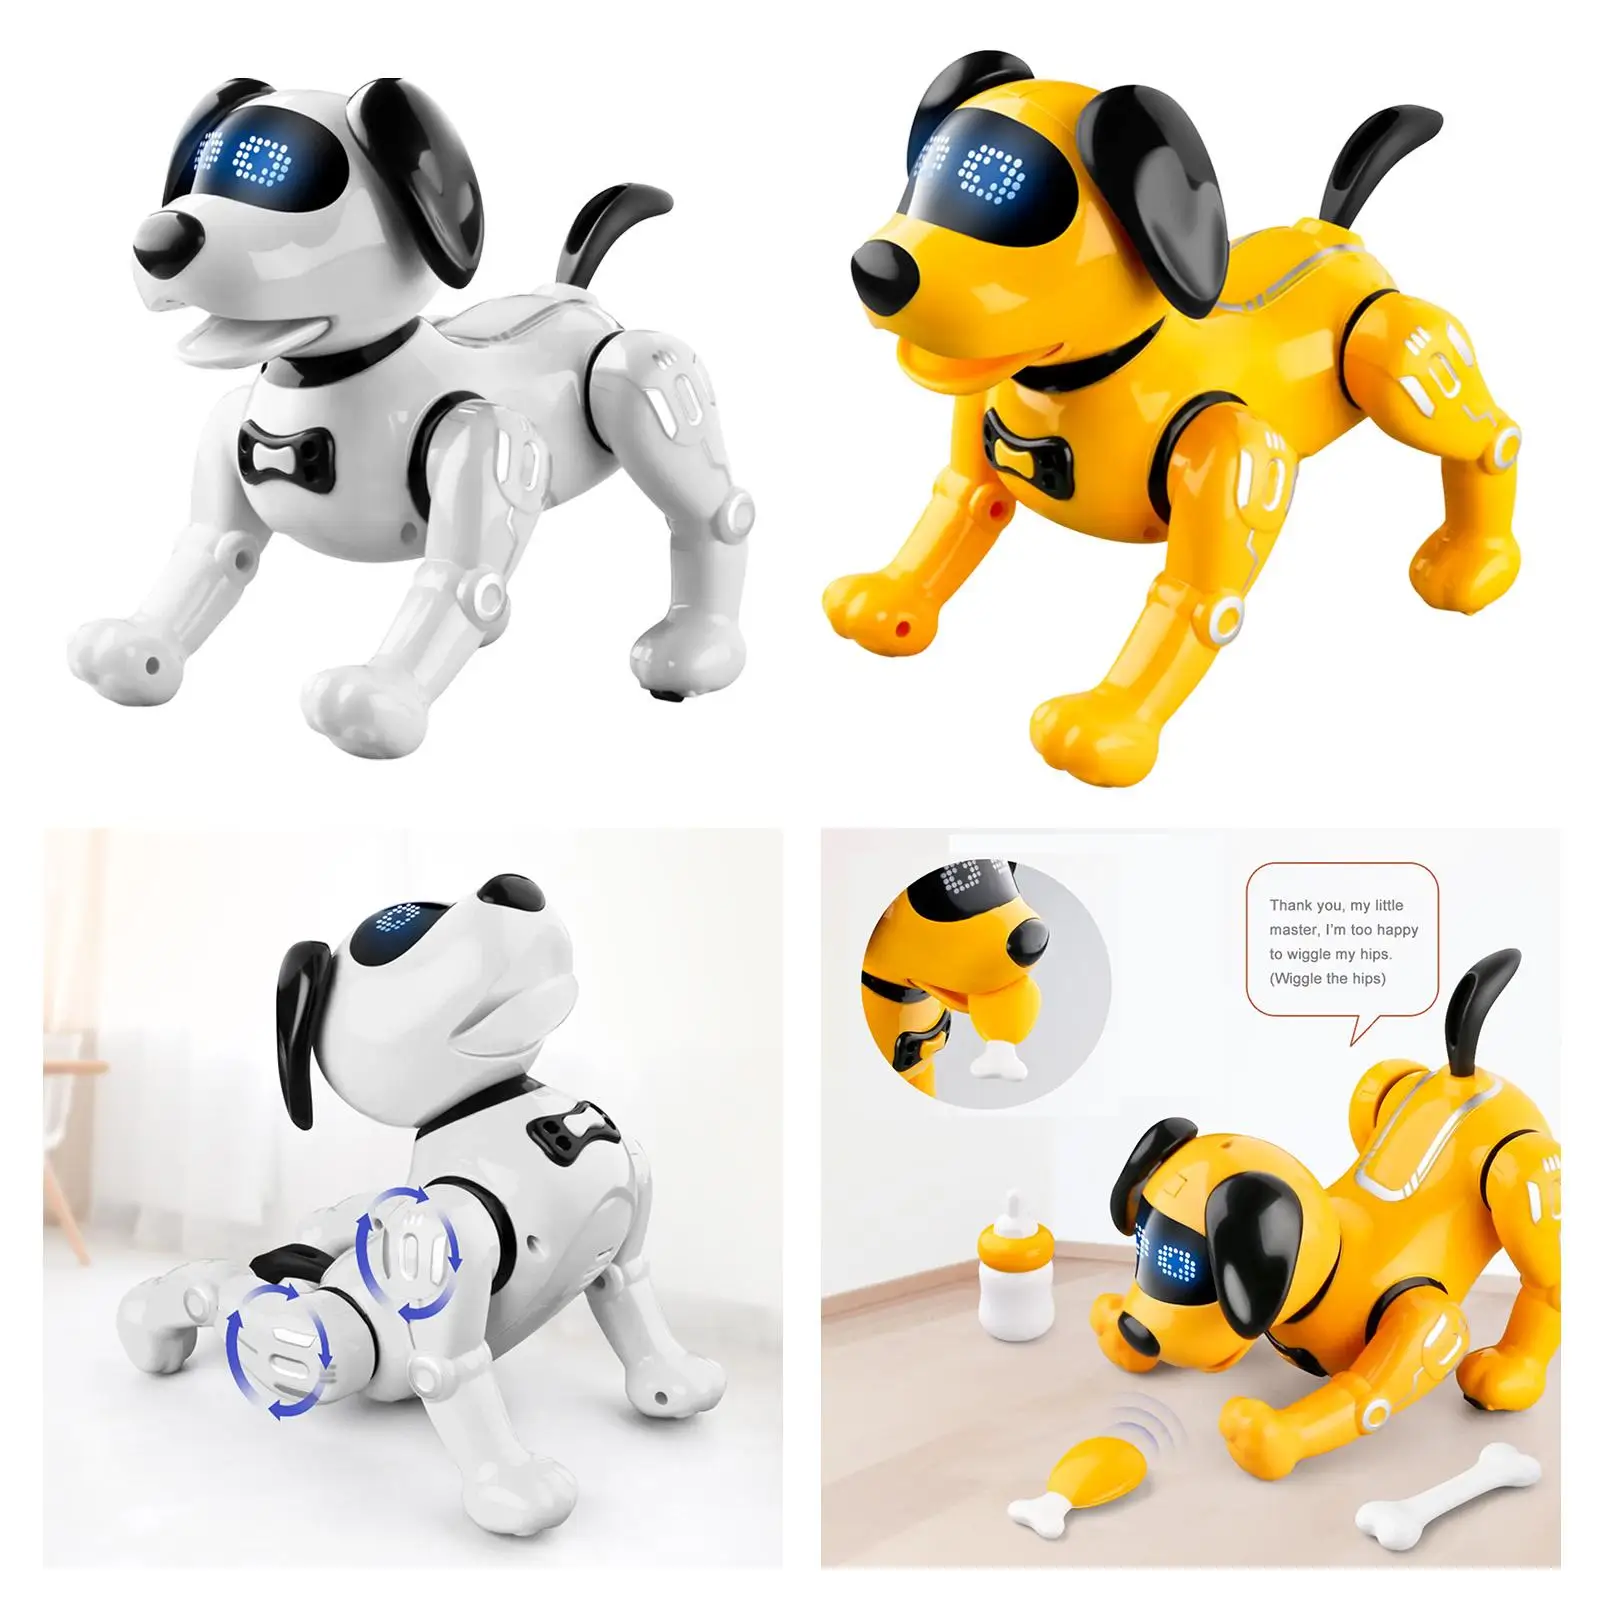 Remote Control Robot Dog Toy Voice Remote Control Toy RC Toys interactive Robotic Pet for Boys and Girls Age 5 6 7 8 9 10